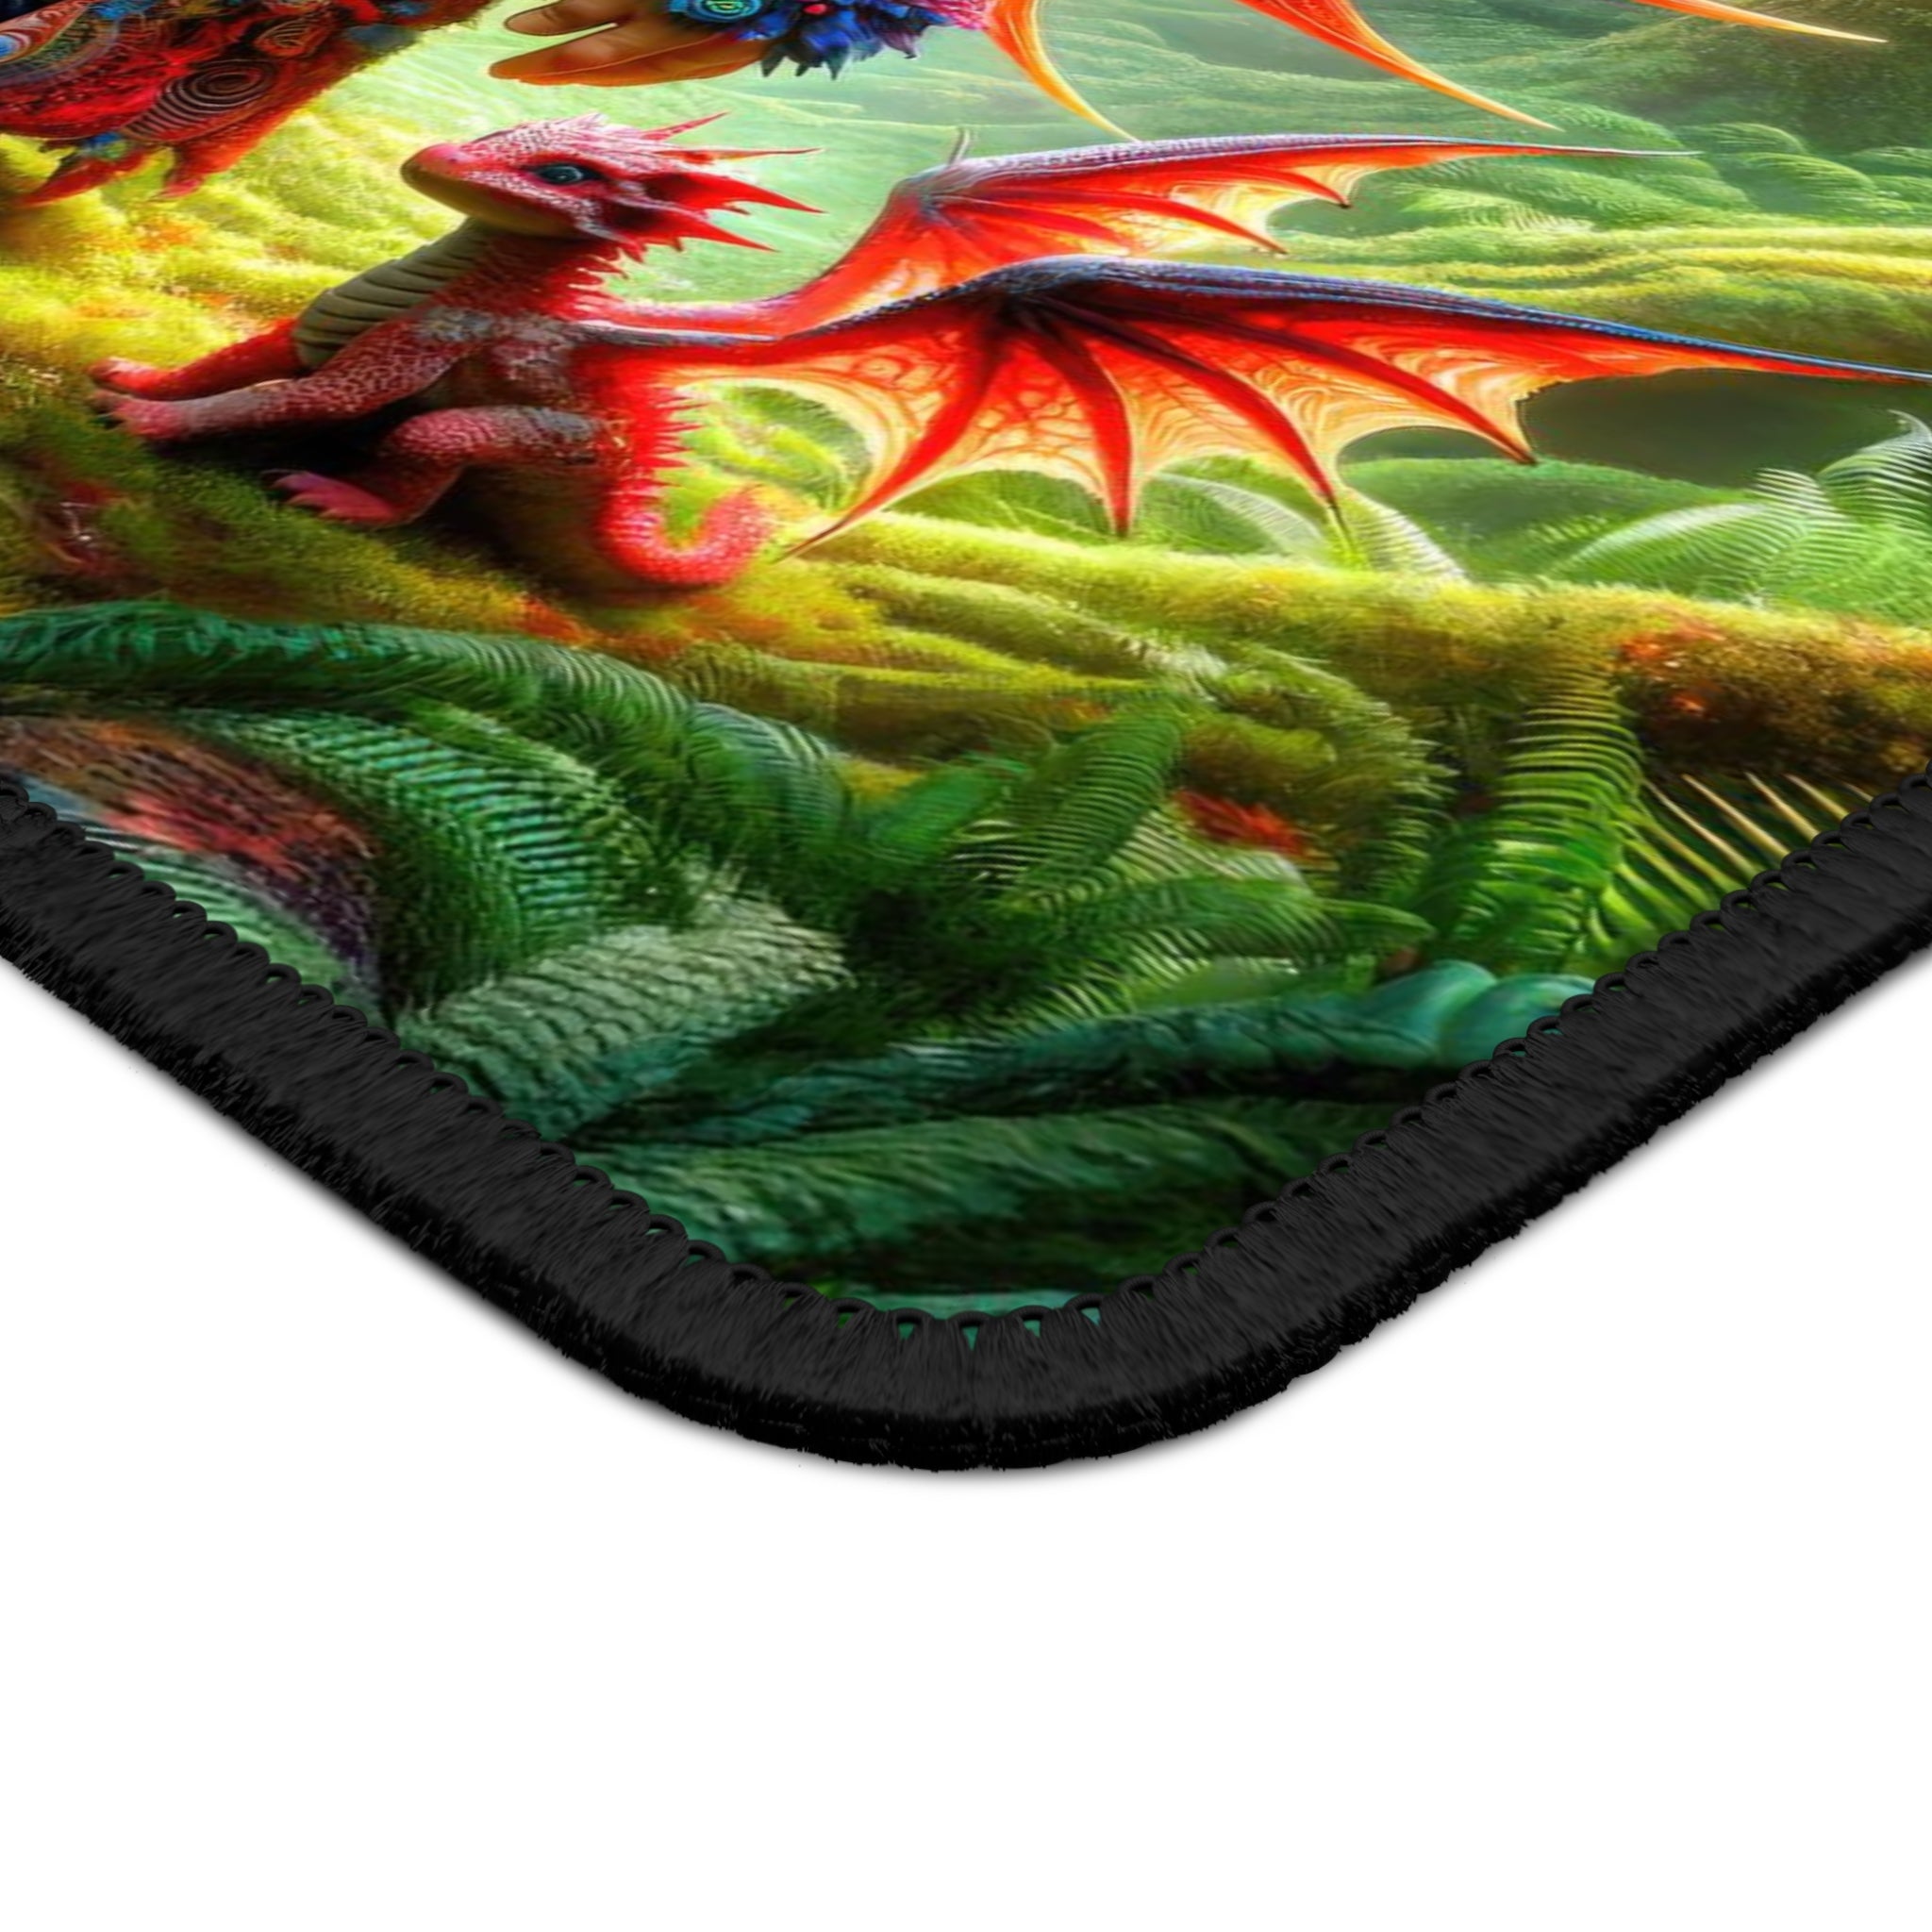 The Guardian of Whimsy Wood Gaming Mouse Pad